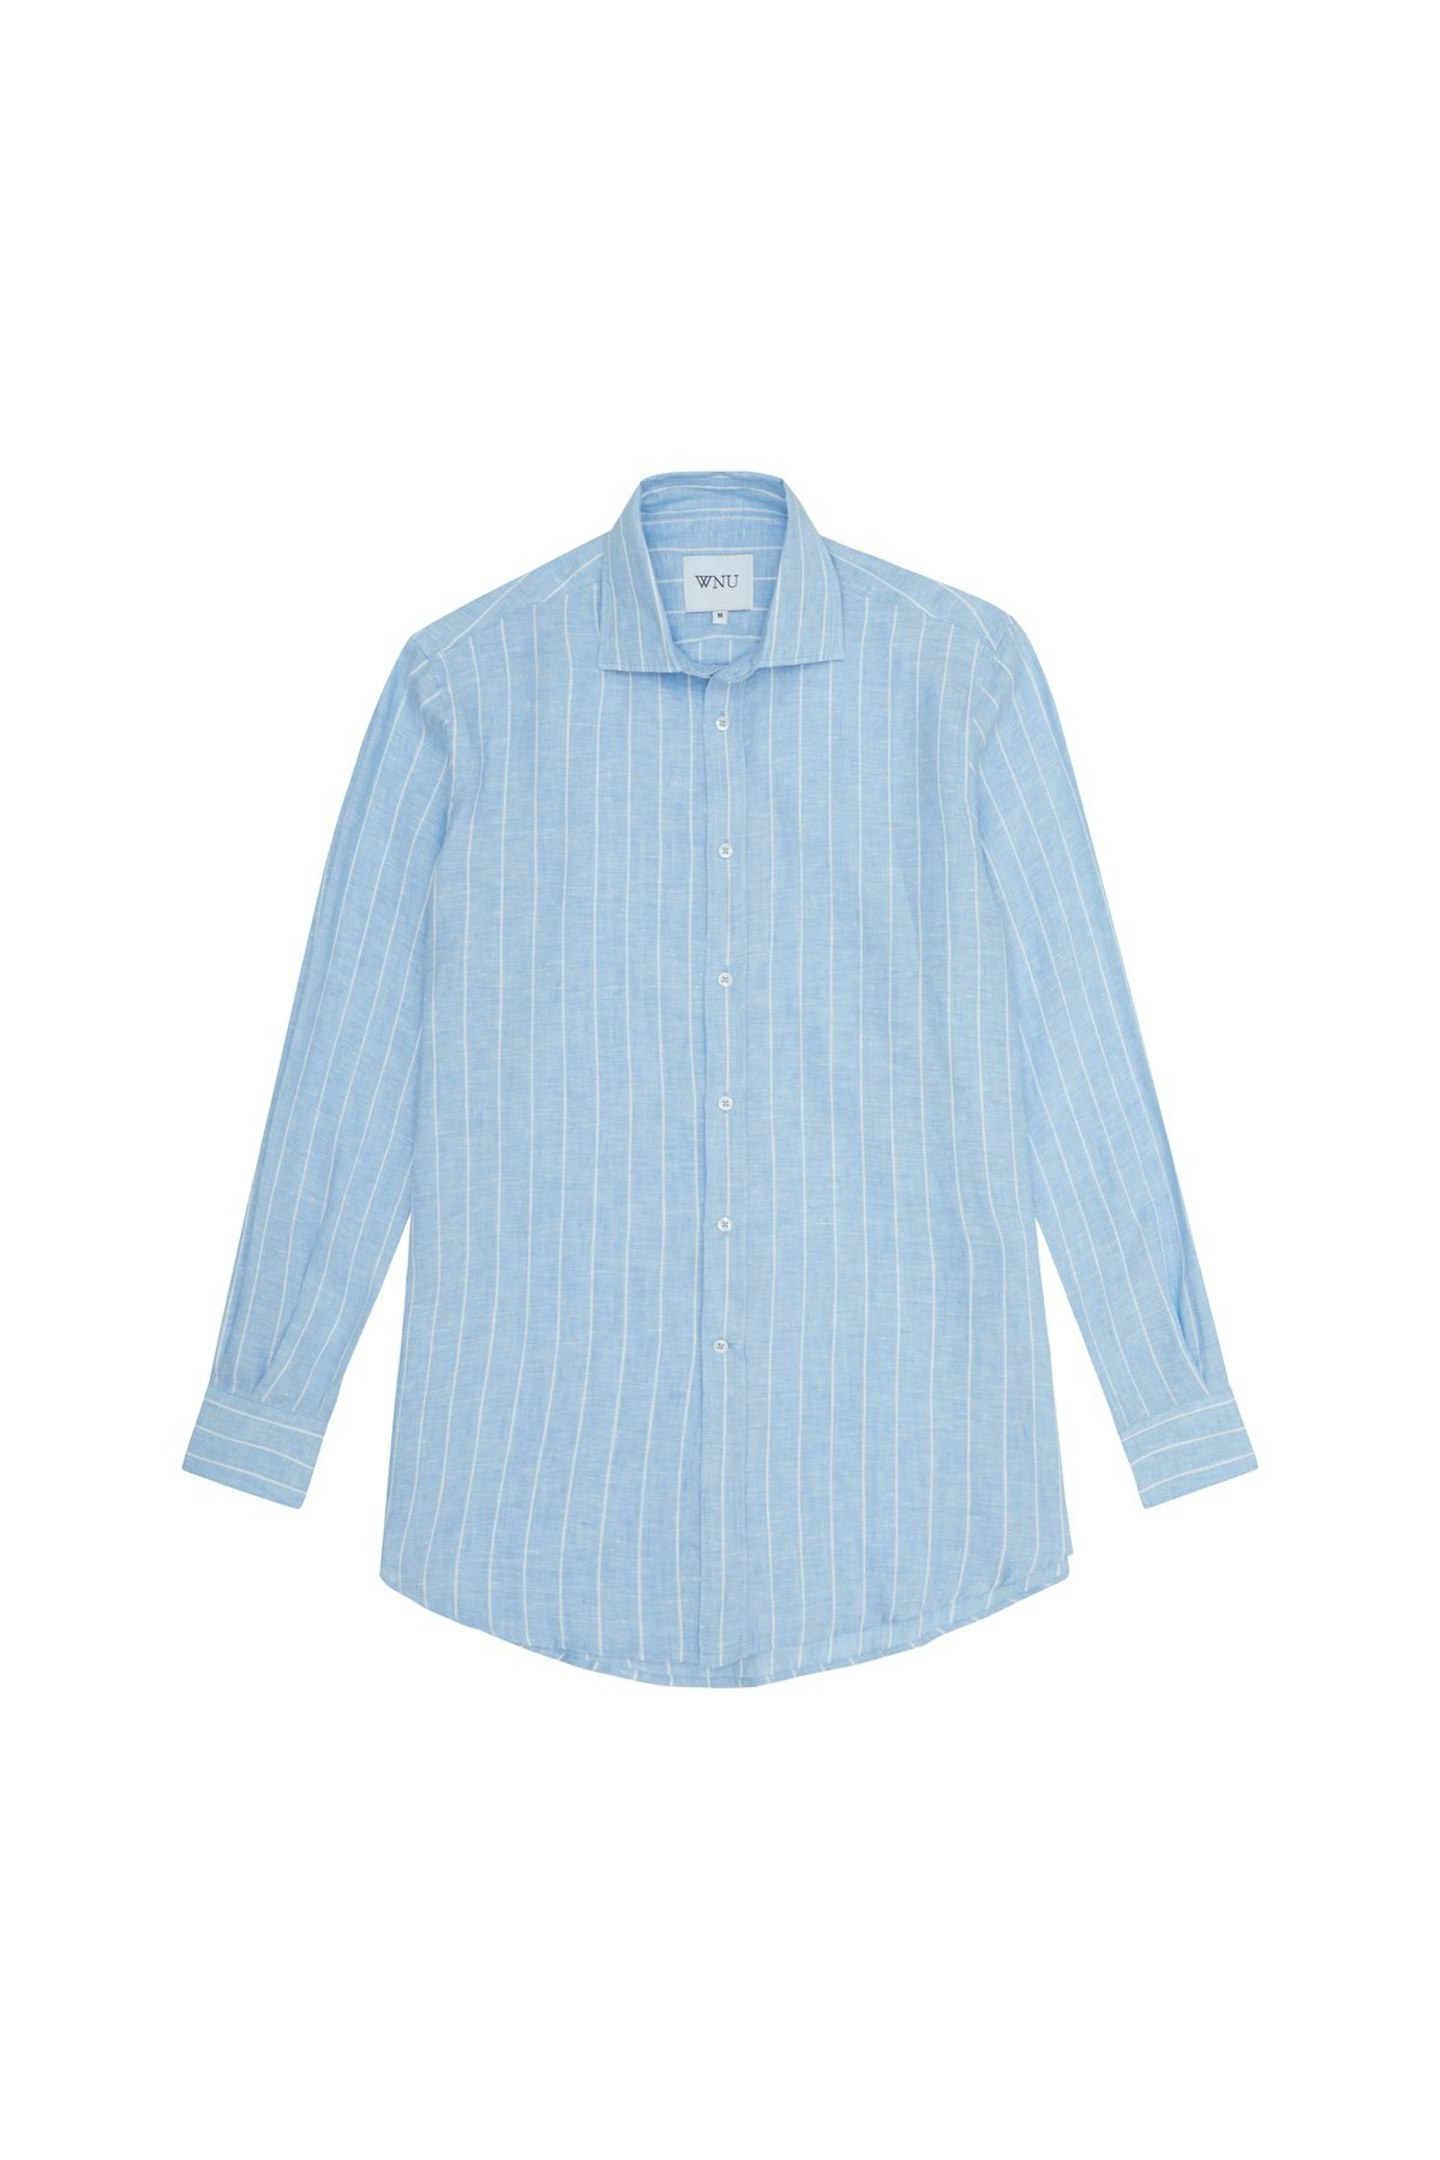 With Nothing Underneath, Sky Blue stripe shirt, £85